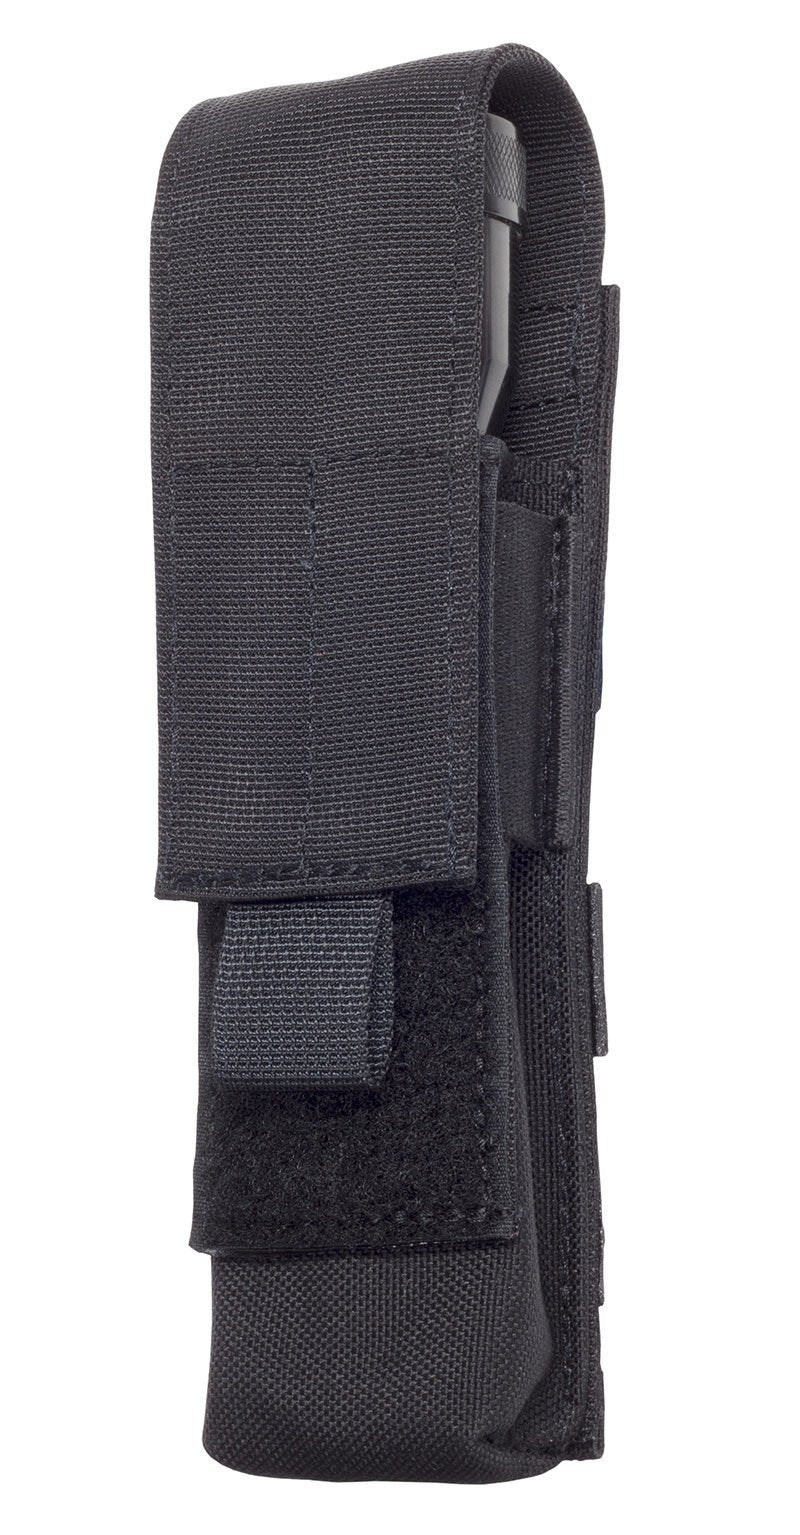 Elite Survival Systems Flashlight MOLLE Pouch, designed to be MOLLE compatible and attached to a belt.